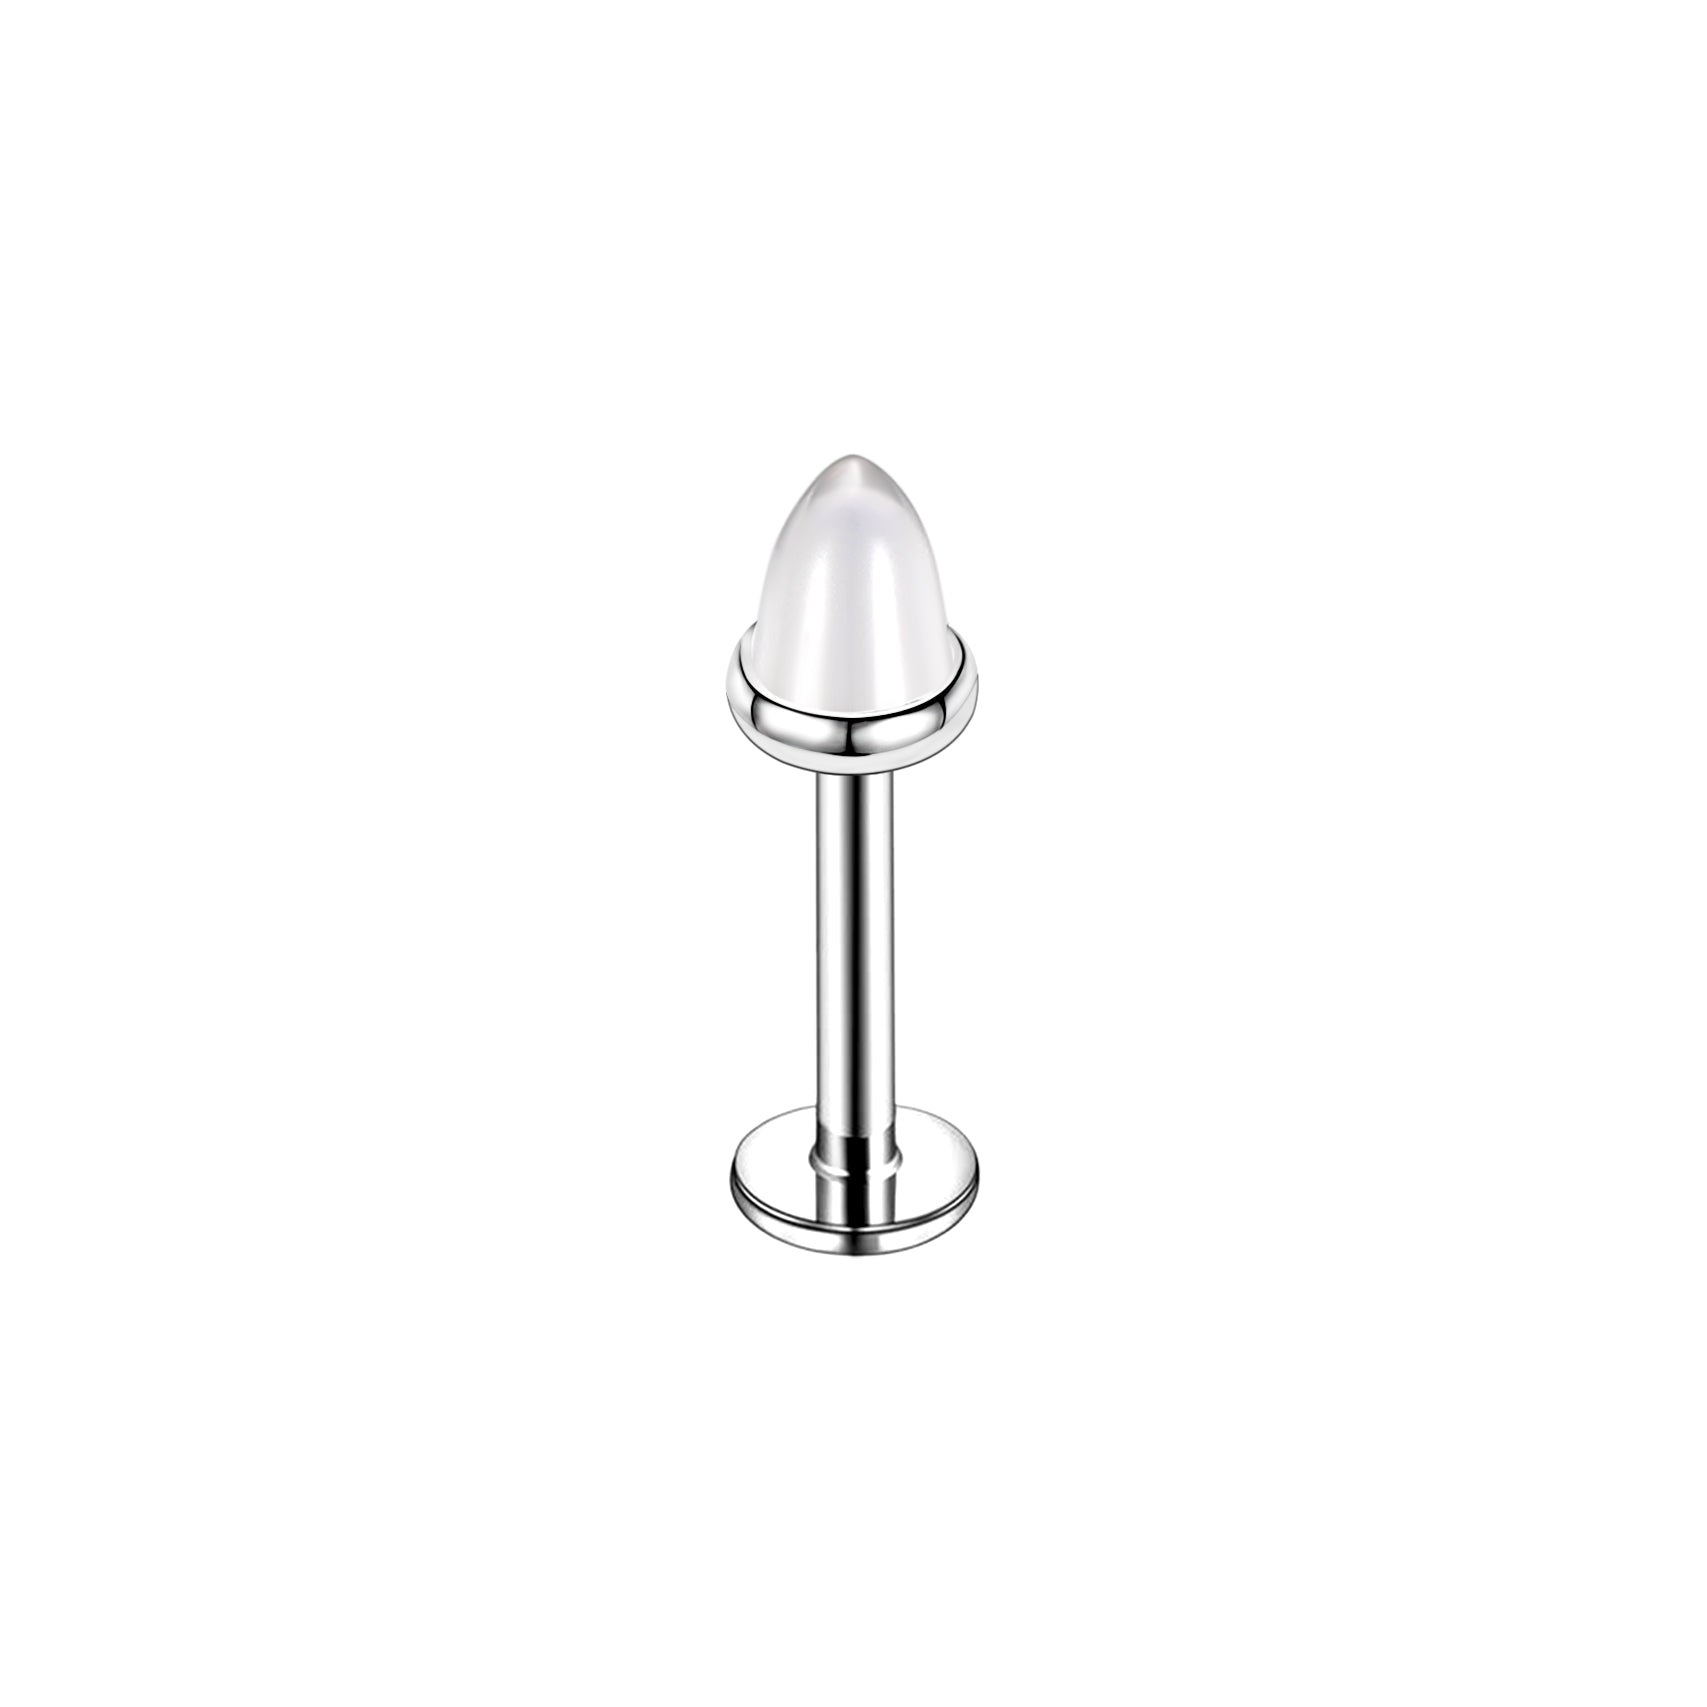 16g-bullet-labret-rings-stainless-steel-tragus-helix-conch-piercing